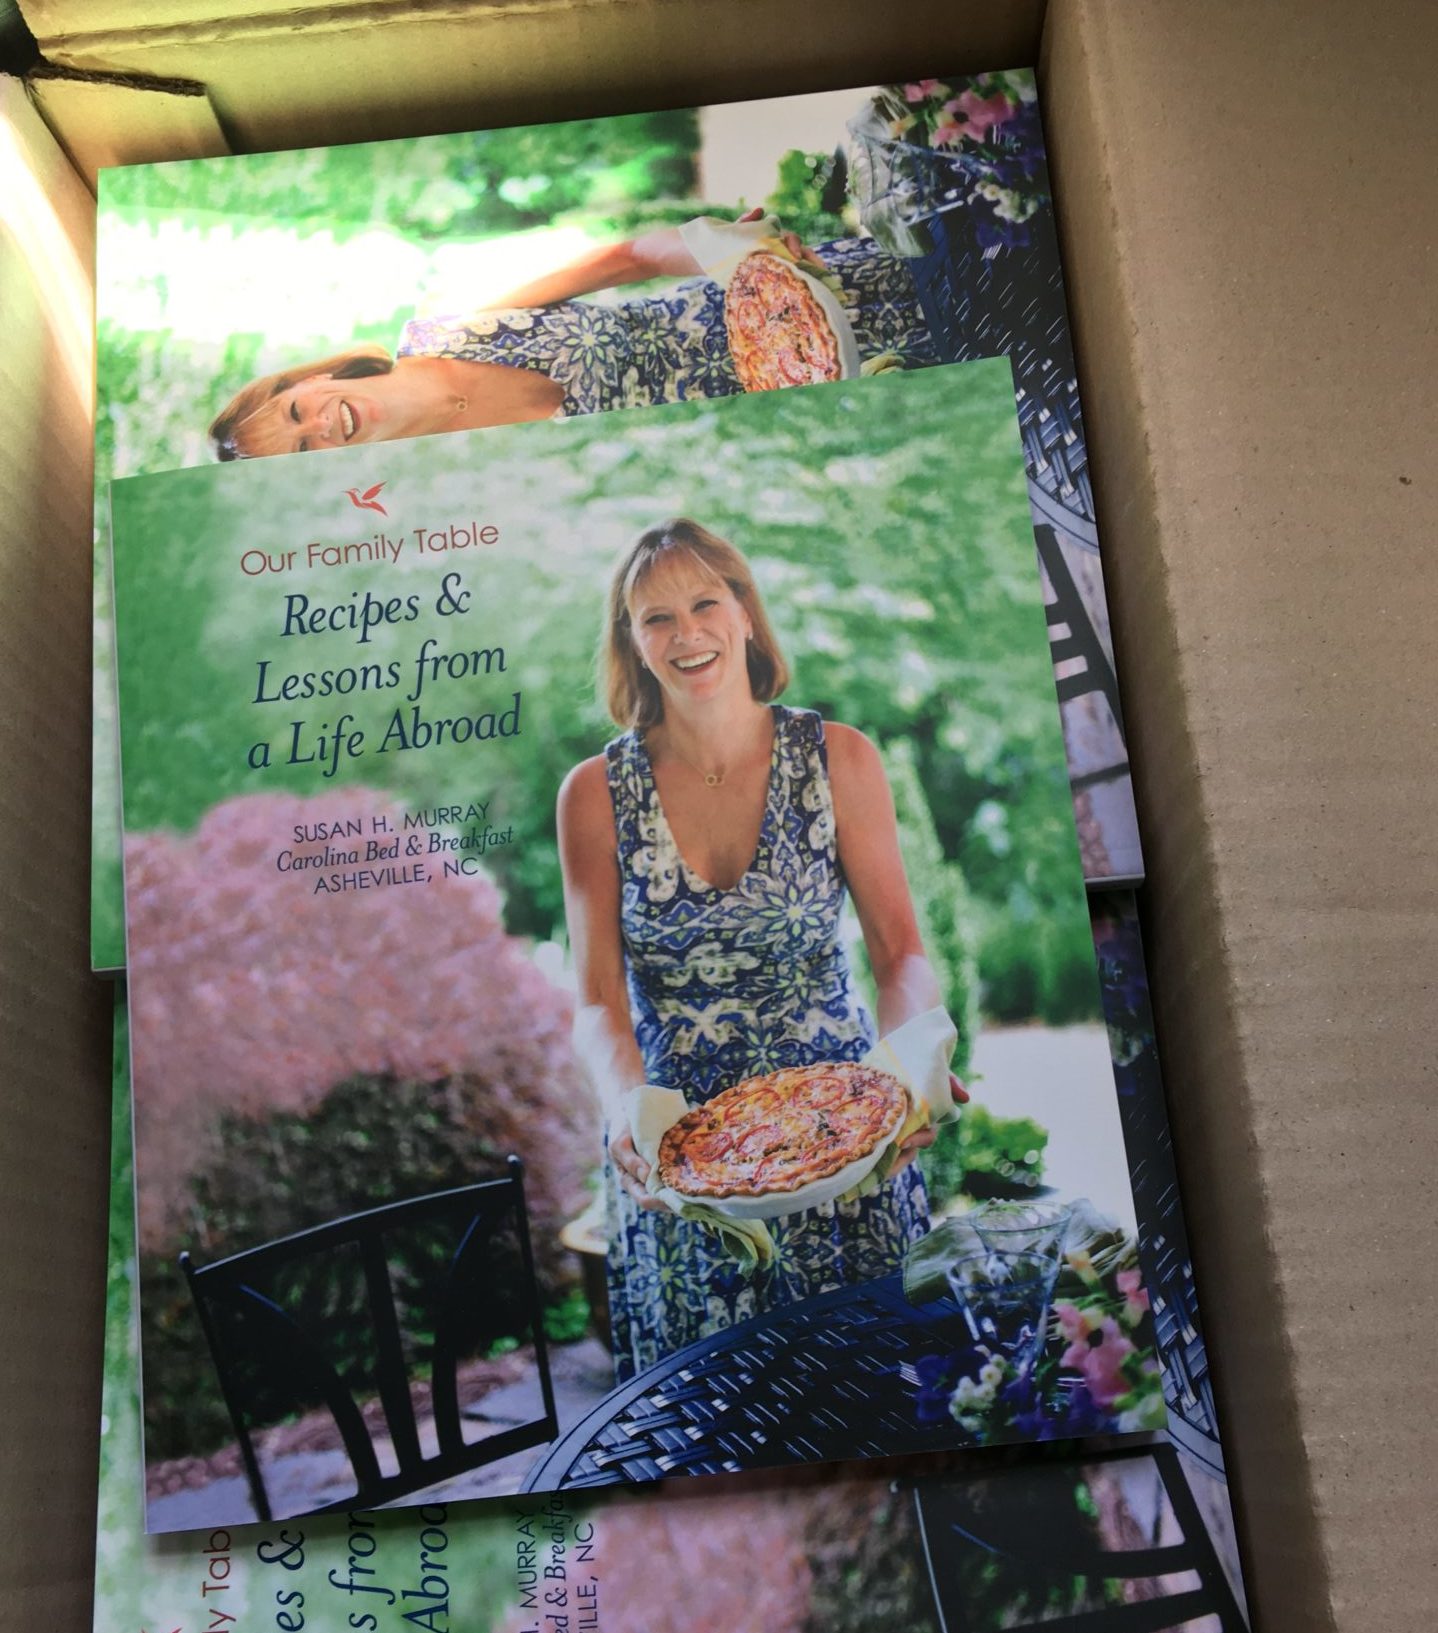 Cookbook with woman and quiche in garden